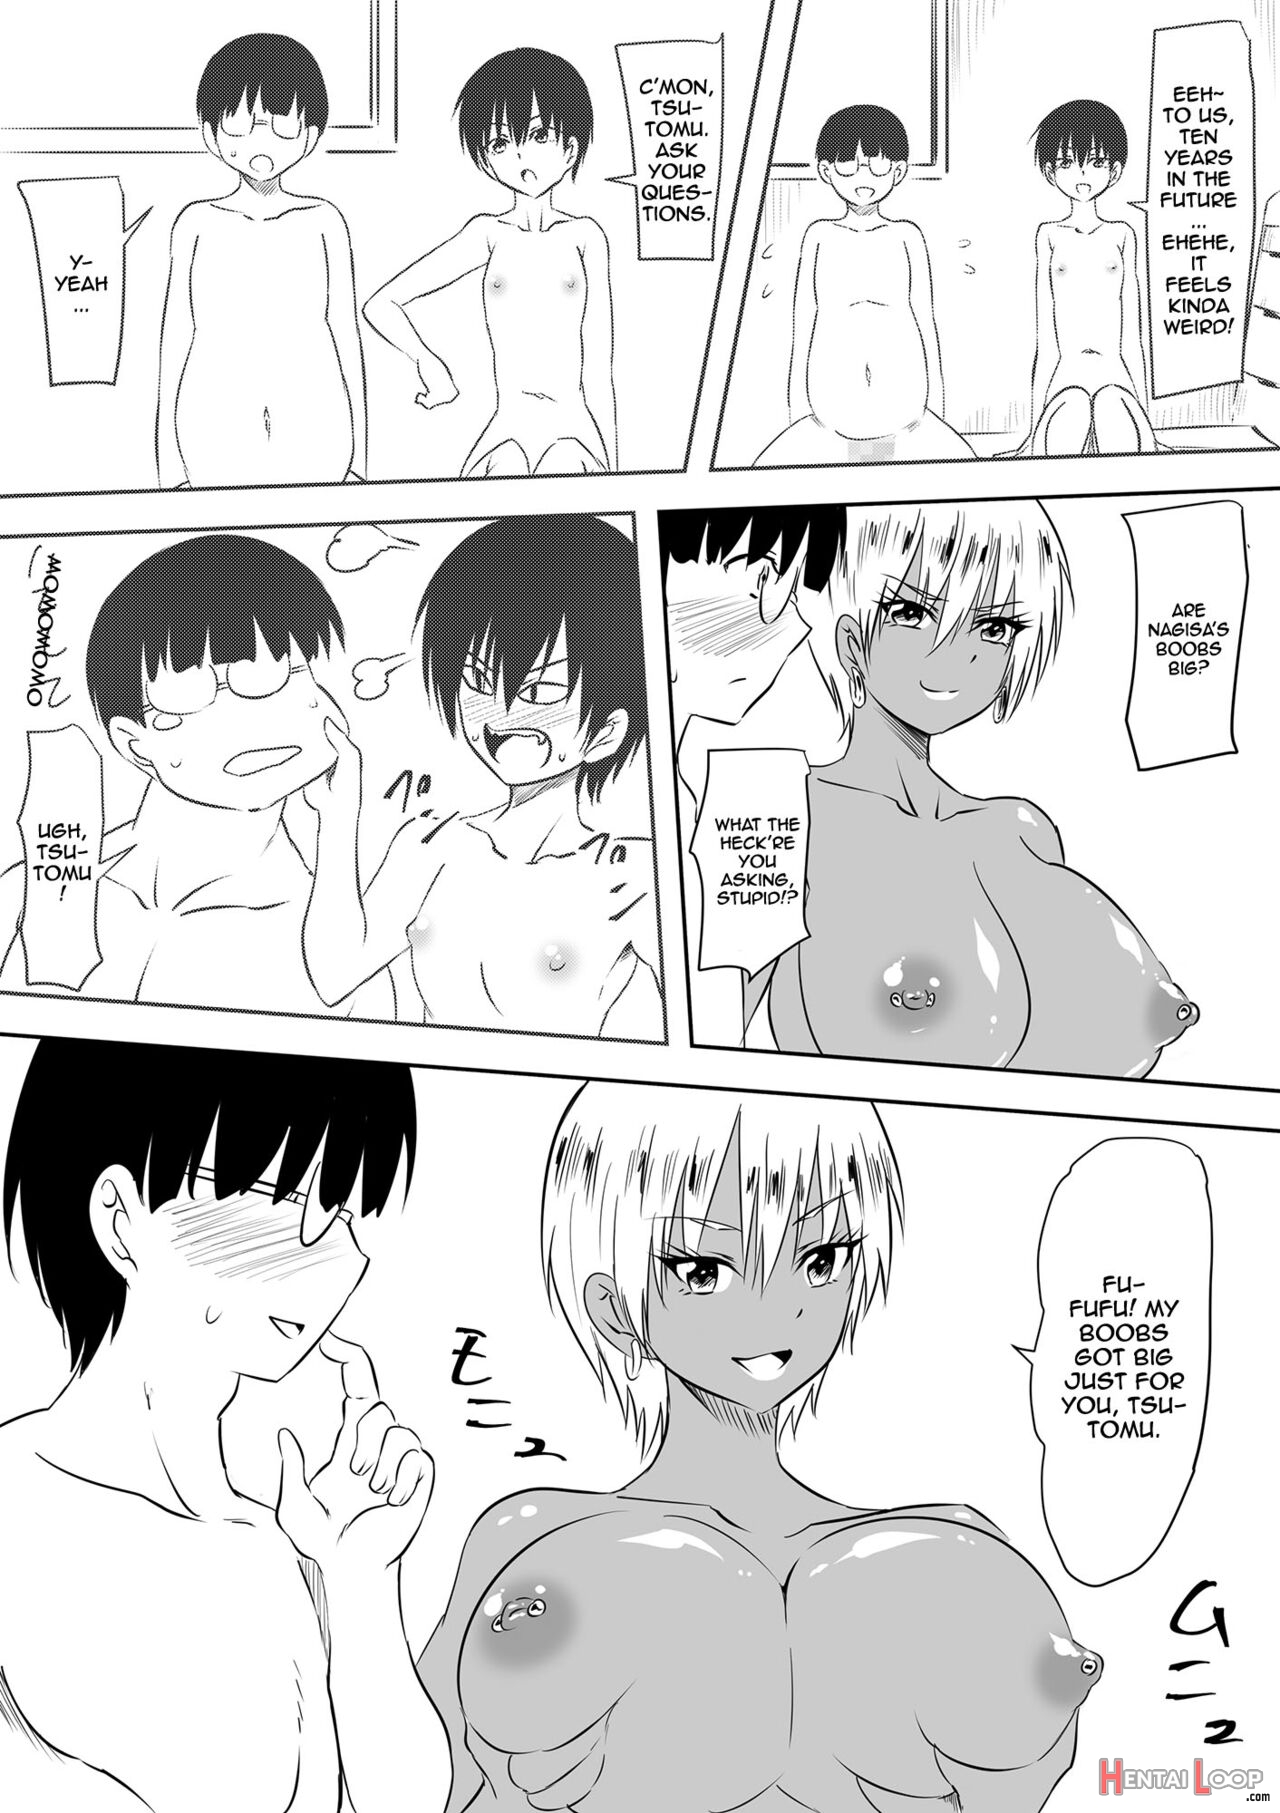 Development Records Of An Asocial Otaku And A Brown Tomboy Going At It Over And Over page 31